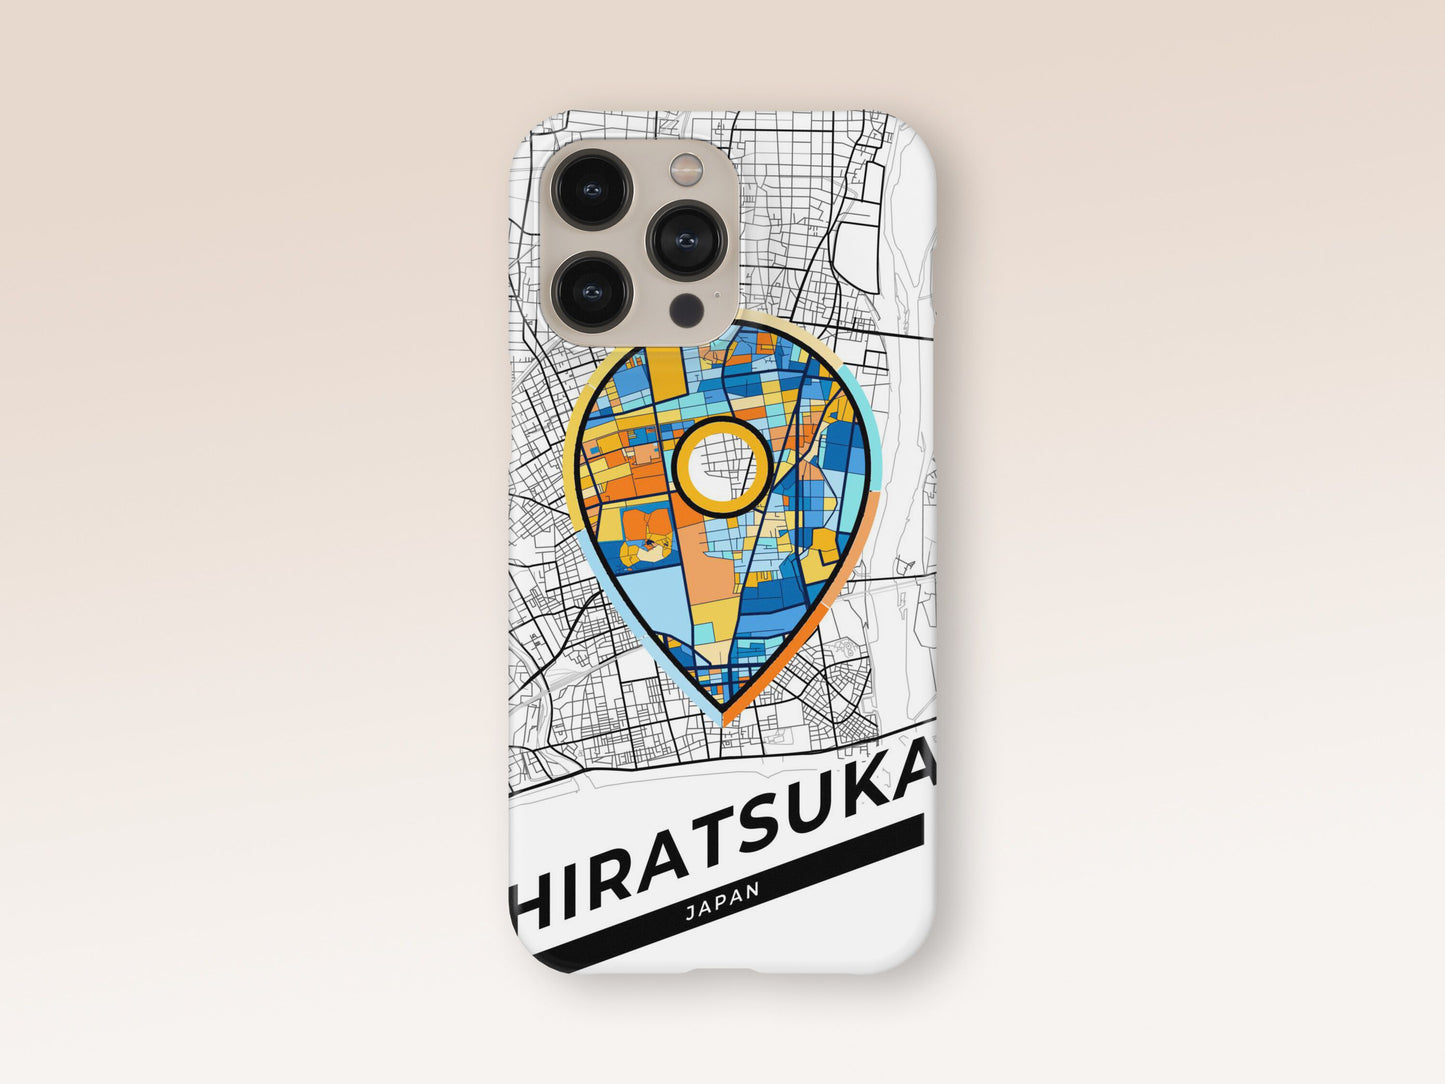 Hiratsuka Japan slim phone case with colorful icon. Birthday, wedding or housewarming gift. Couple match cases. 1